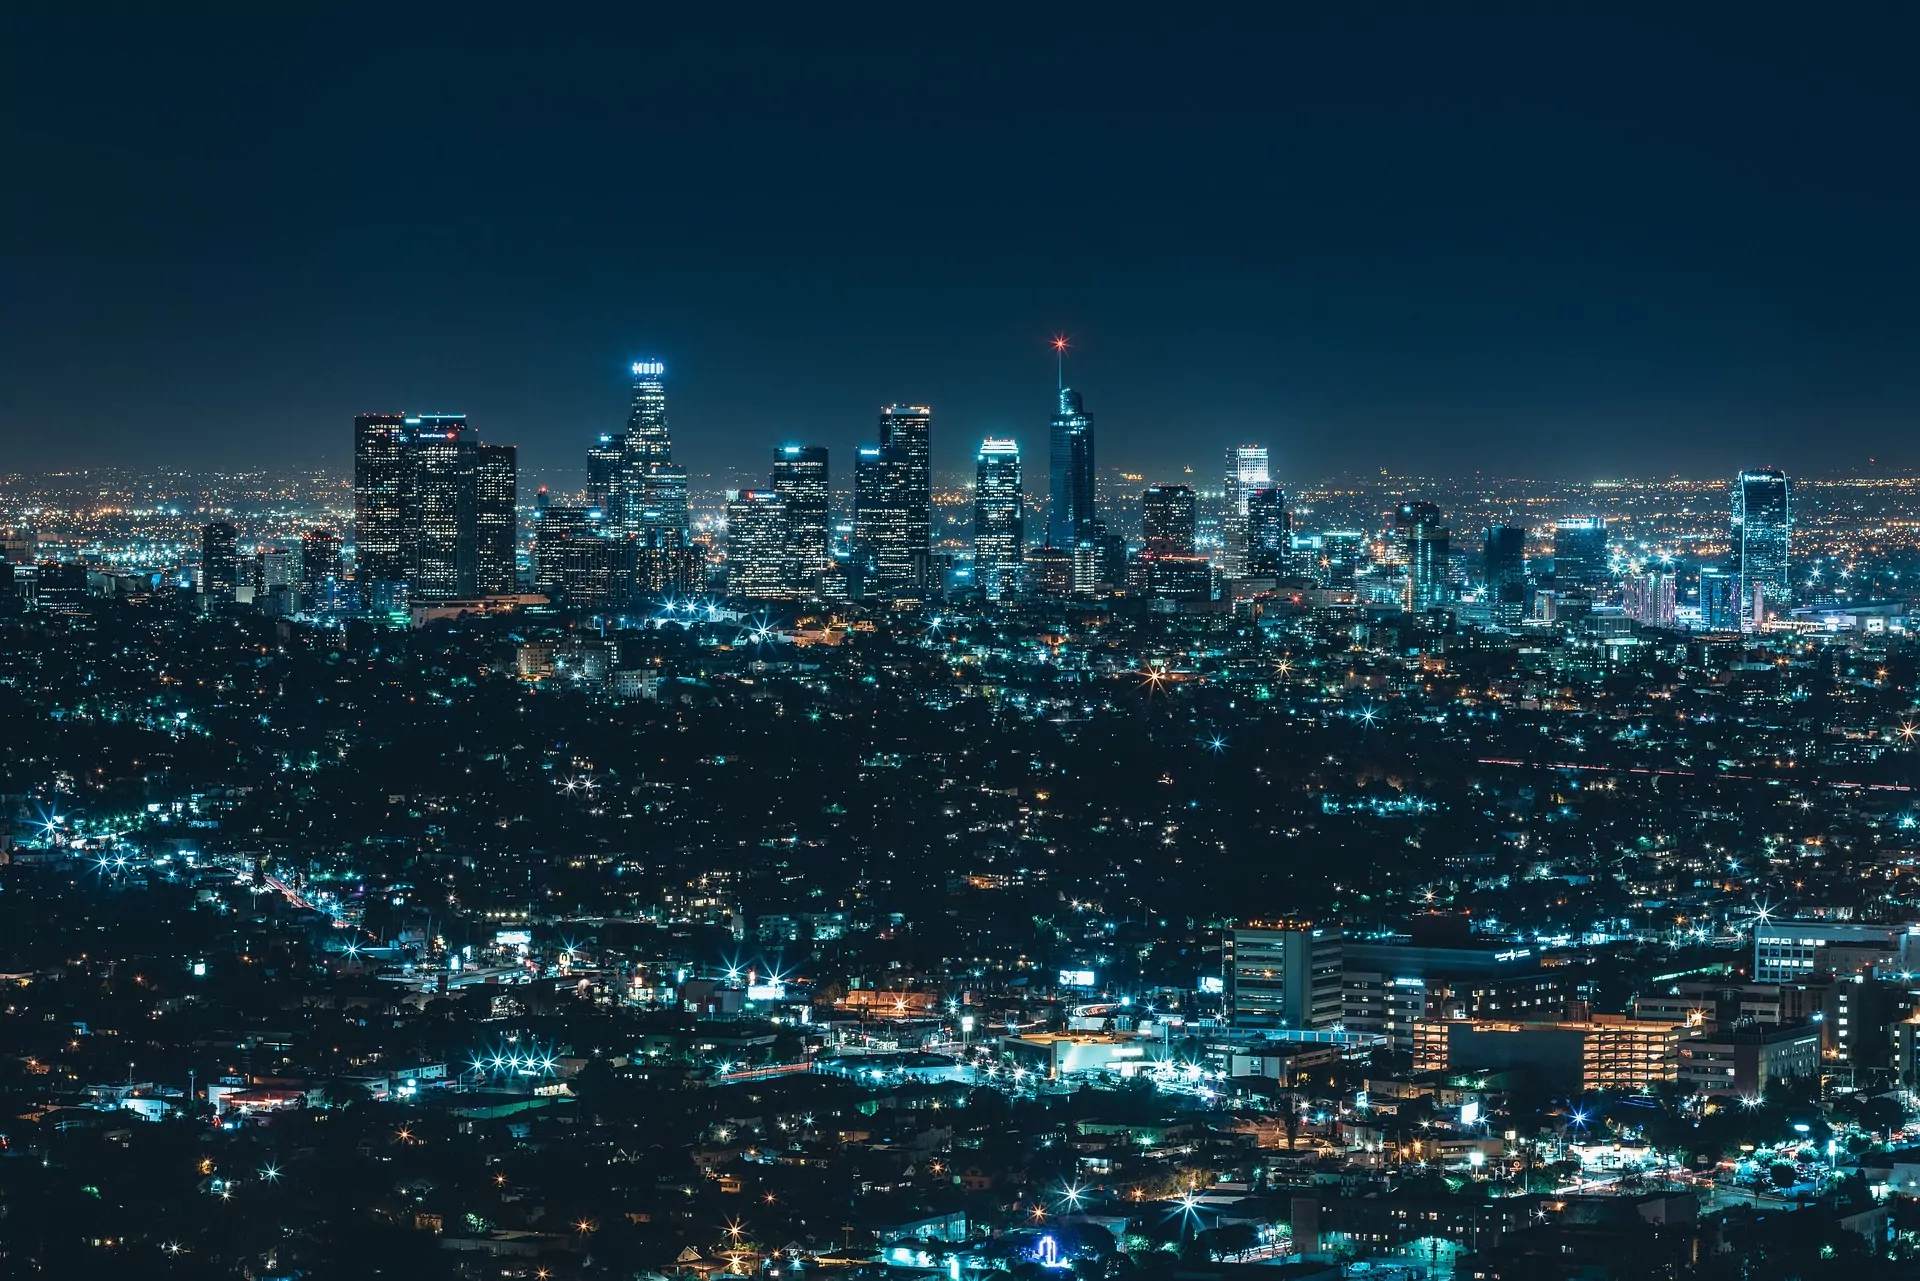 An image of a city skyline at night. Clusters of high-rise buildings dominate this landscape and blue hued lights give this image a striking appearance. BBC's Panorama: 15 minute city.